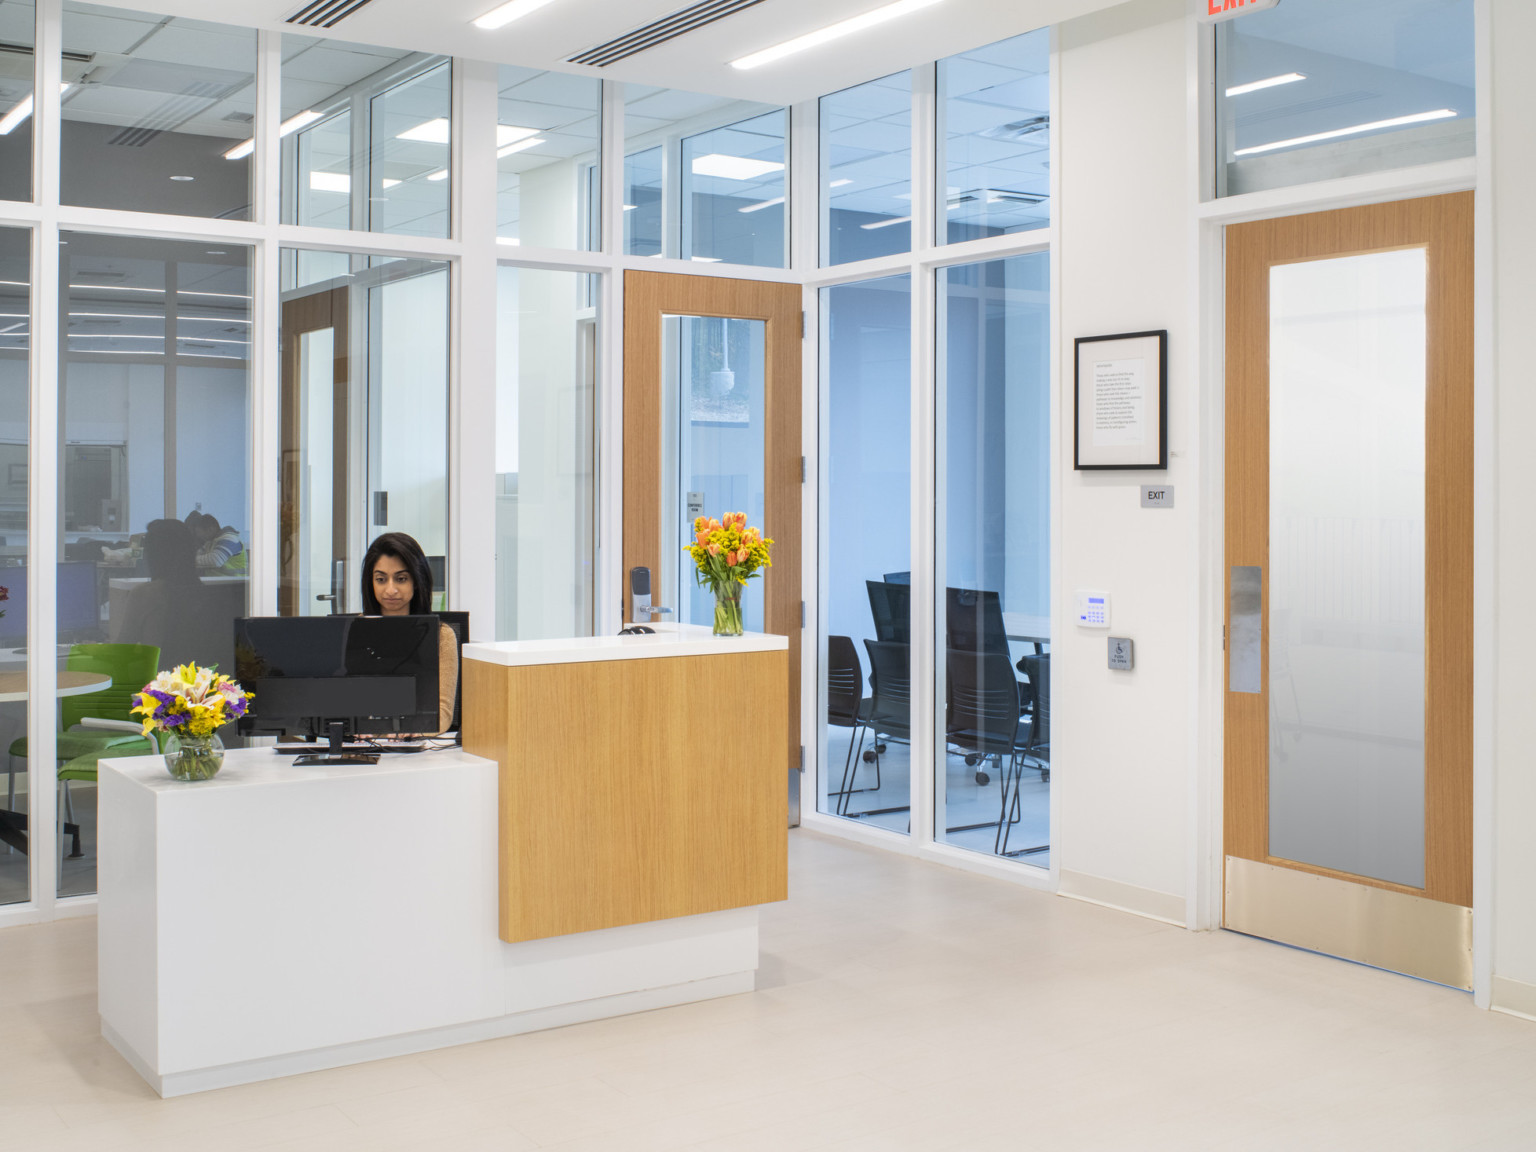 Woman sitting at white desk with wood accents which match office interior. Windows separate office and surrounding spaces